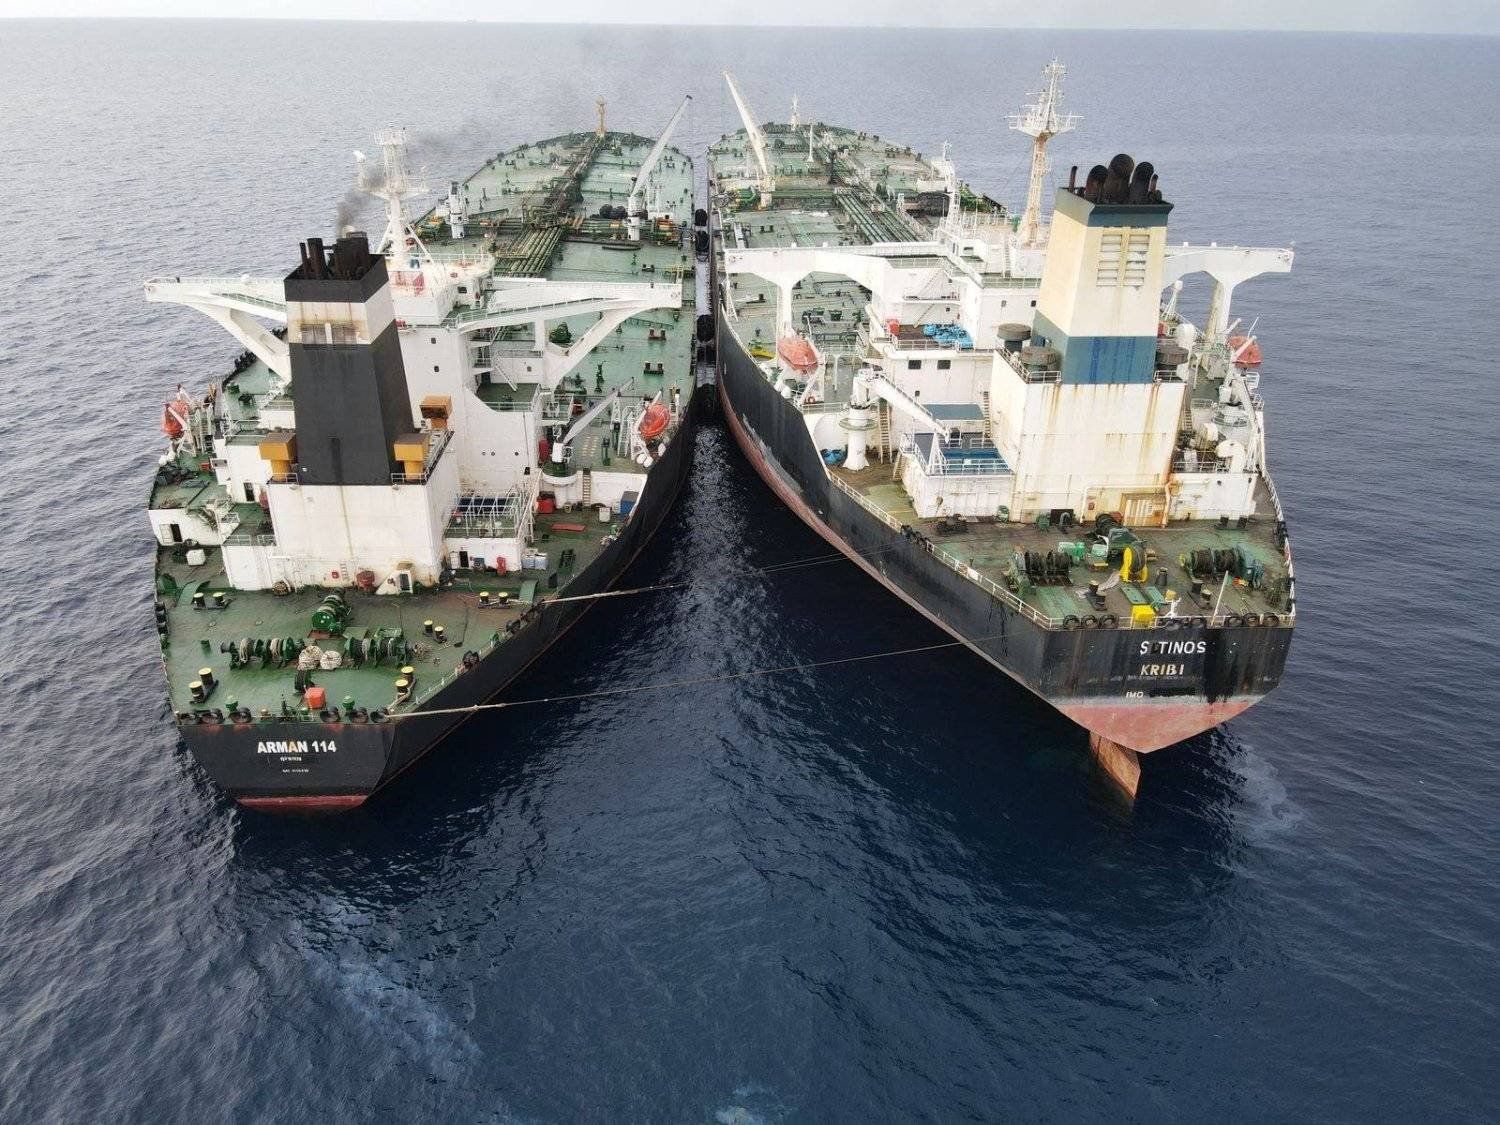 The Iranian-flagged Very Large Crude Carrier (VLCC), MT Arman 114, and the Cameroon-flagged MT S Tinos, are seen as they were spotted conducting a ship-to-ship oil transfer without a permit, according to Indonesia's Maritime Security Agency (Bakamla), near Indonesia's North Natuna Sea, Indonesia, July 7, 2023 in this handout picture released July 11, 2023. (Bakamla/Reuters) 